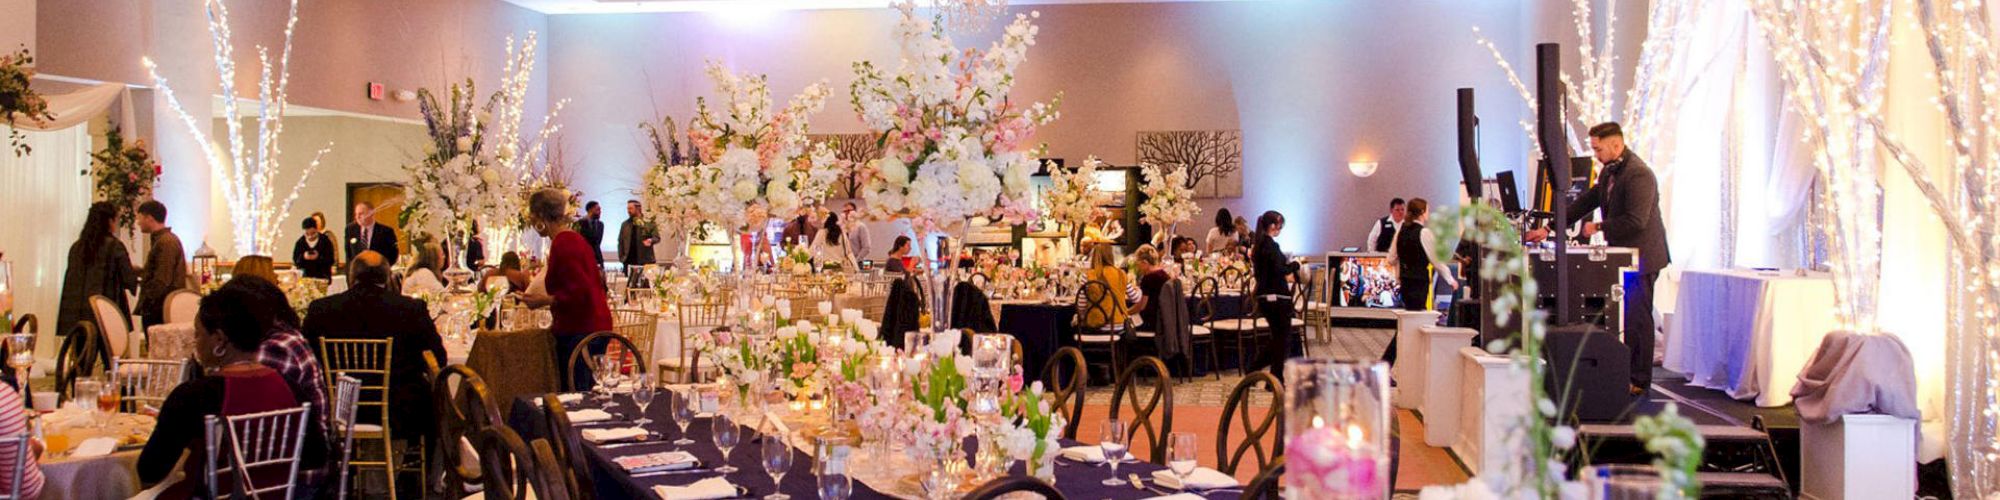 A beautifully decorated banquet hall set for an event, featuring elegant floral arrangements, candlelit tables, and guests enjoying the ambiance.